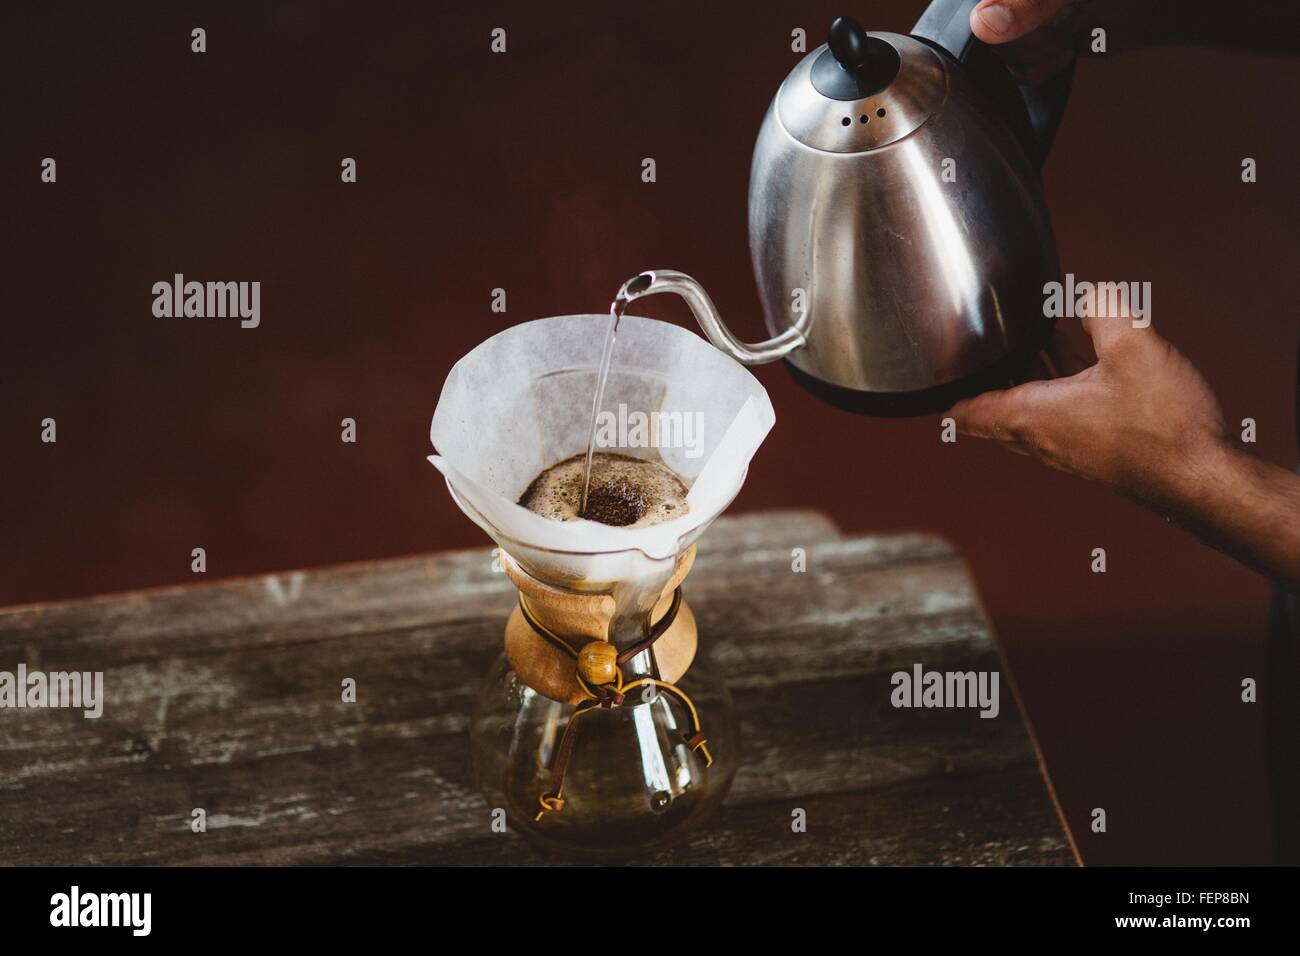 Man pouring water into filter coffee maker Stock Photo